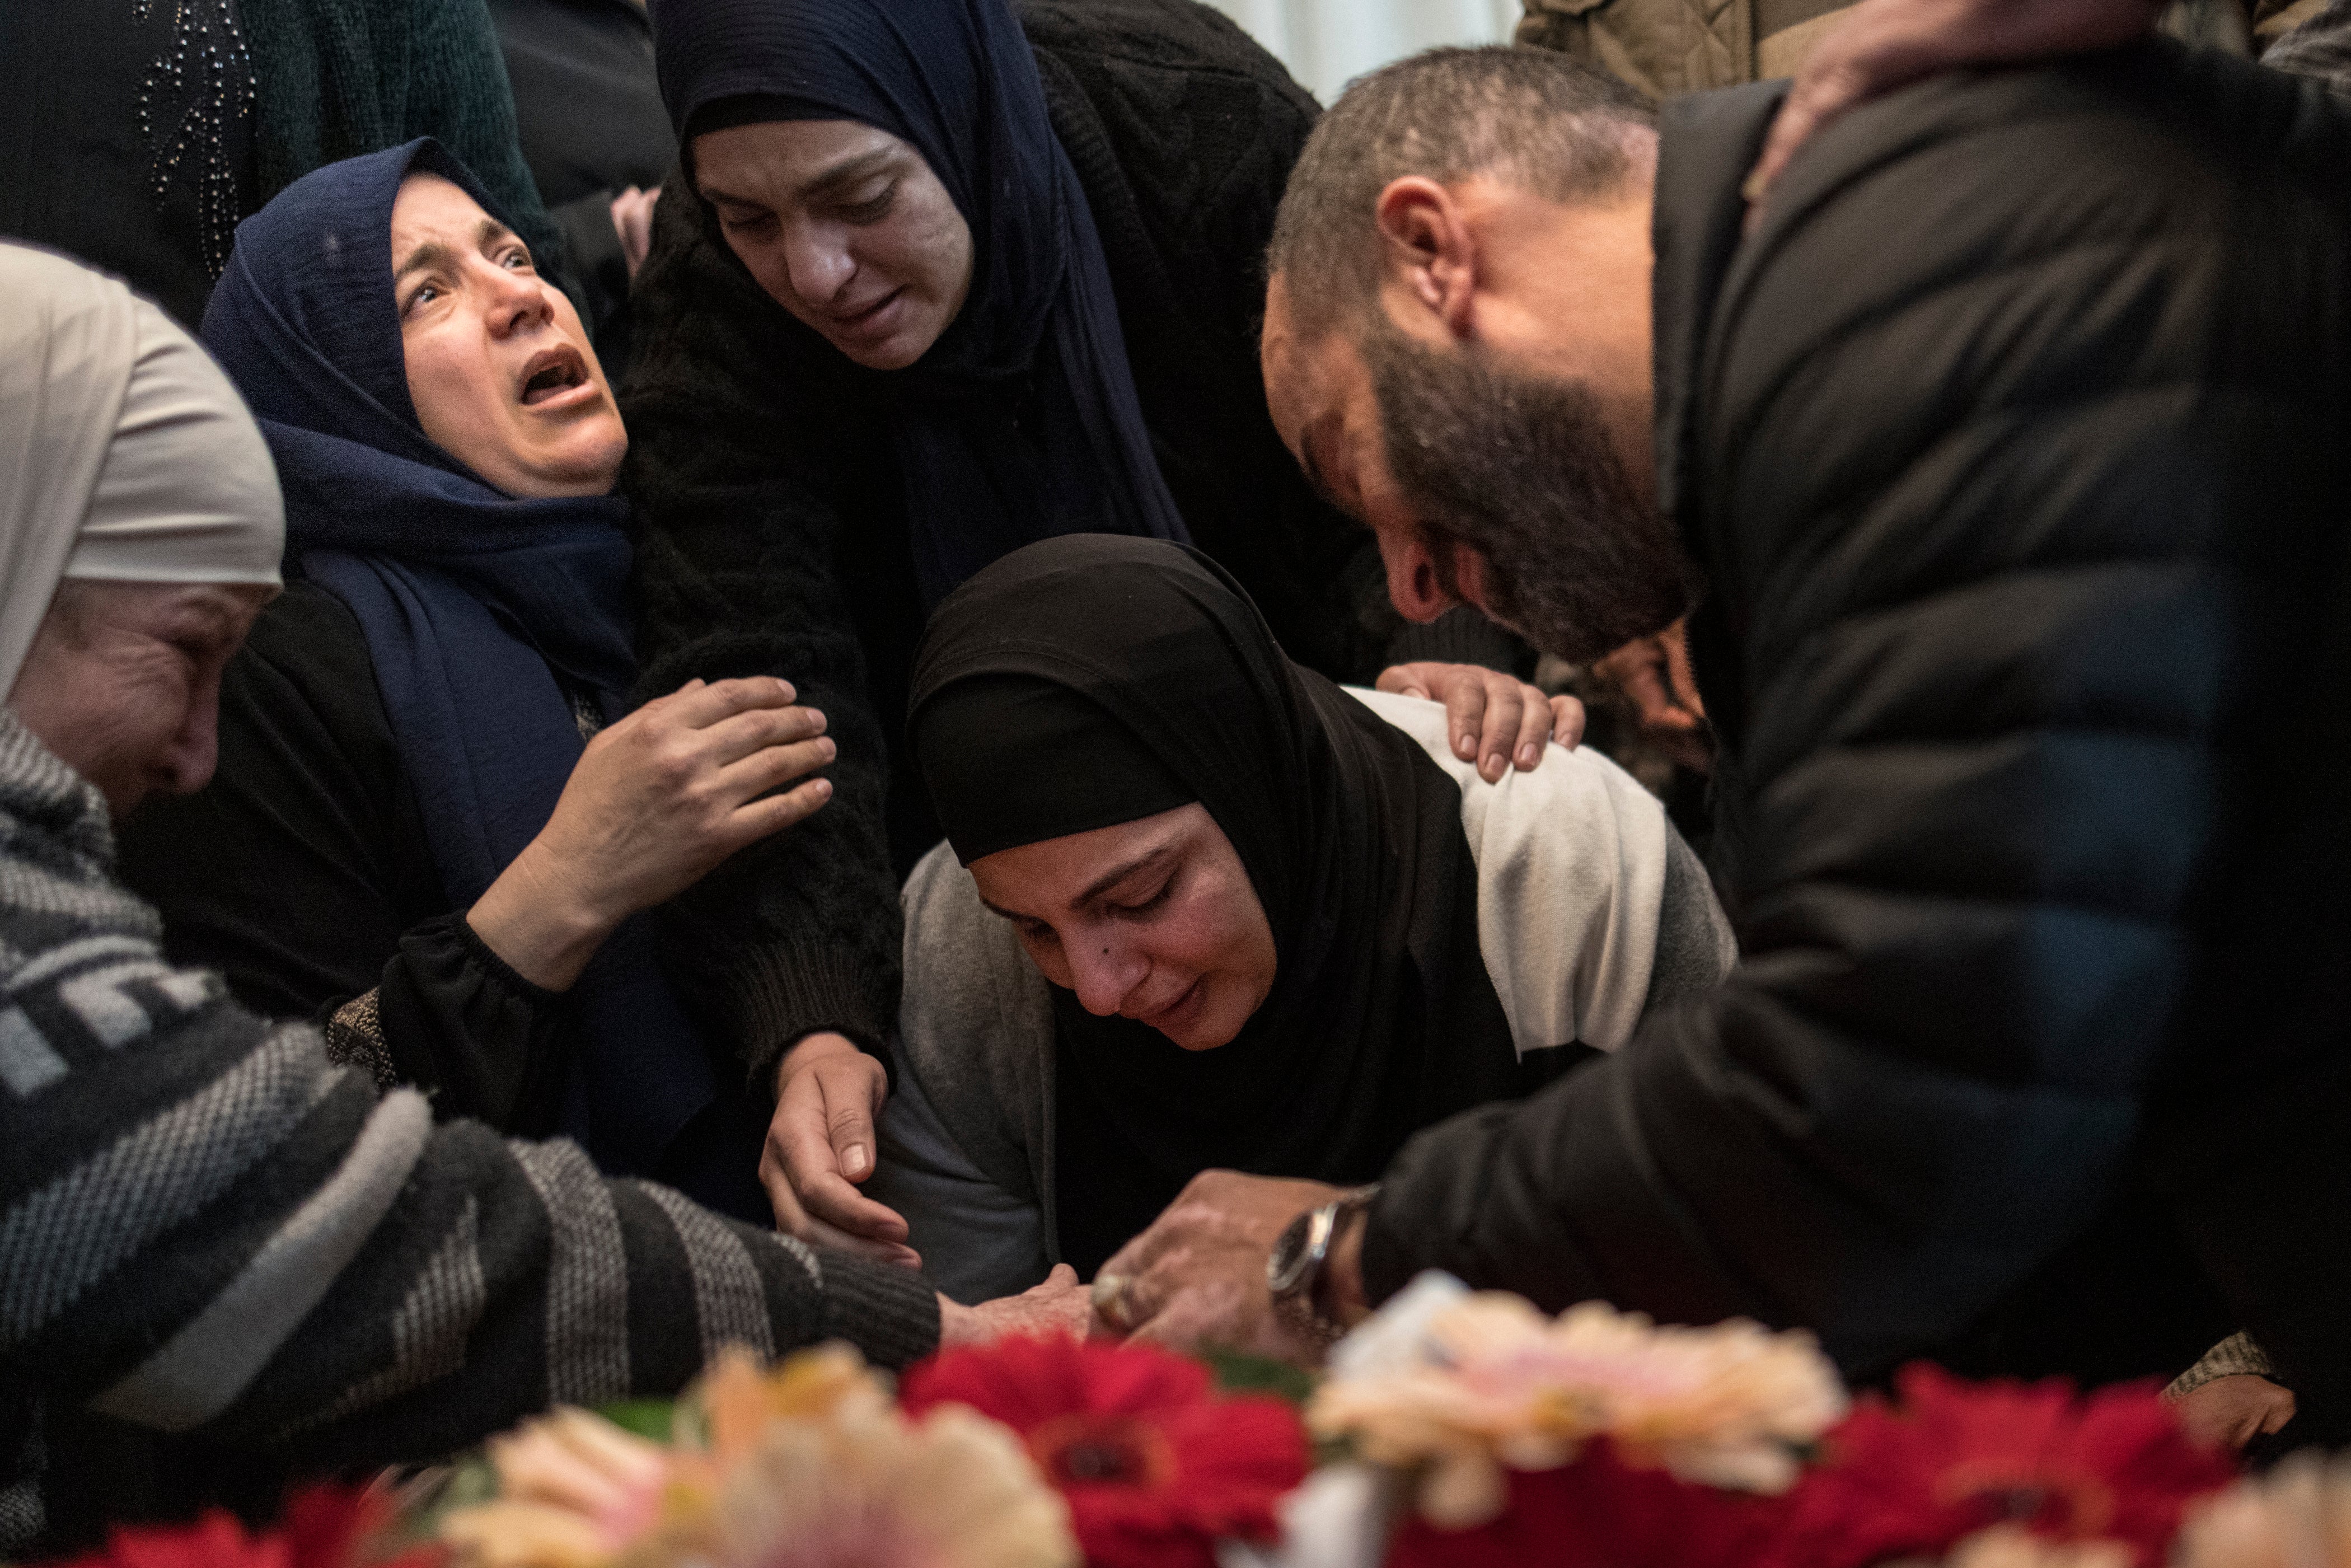 The mother of 17-year-old Palestinian Tawfic Abdel Jabbar mourns over his body before a funeral procession in the Israeli-occupied West Bank on 20 January.